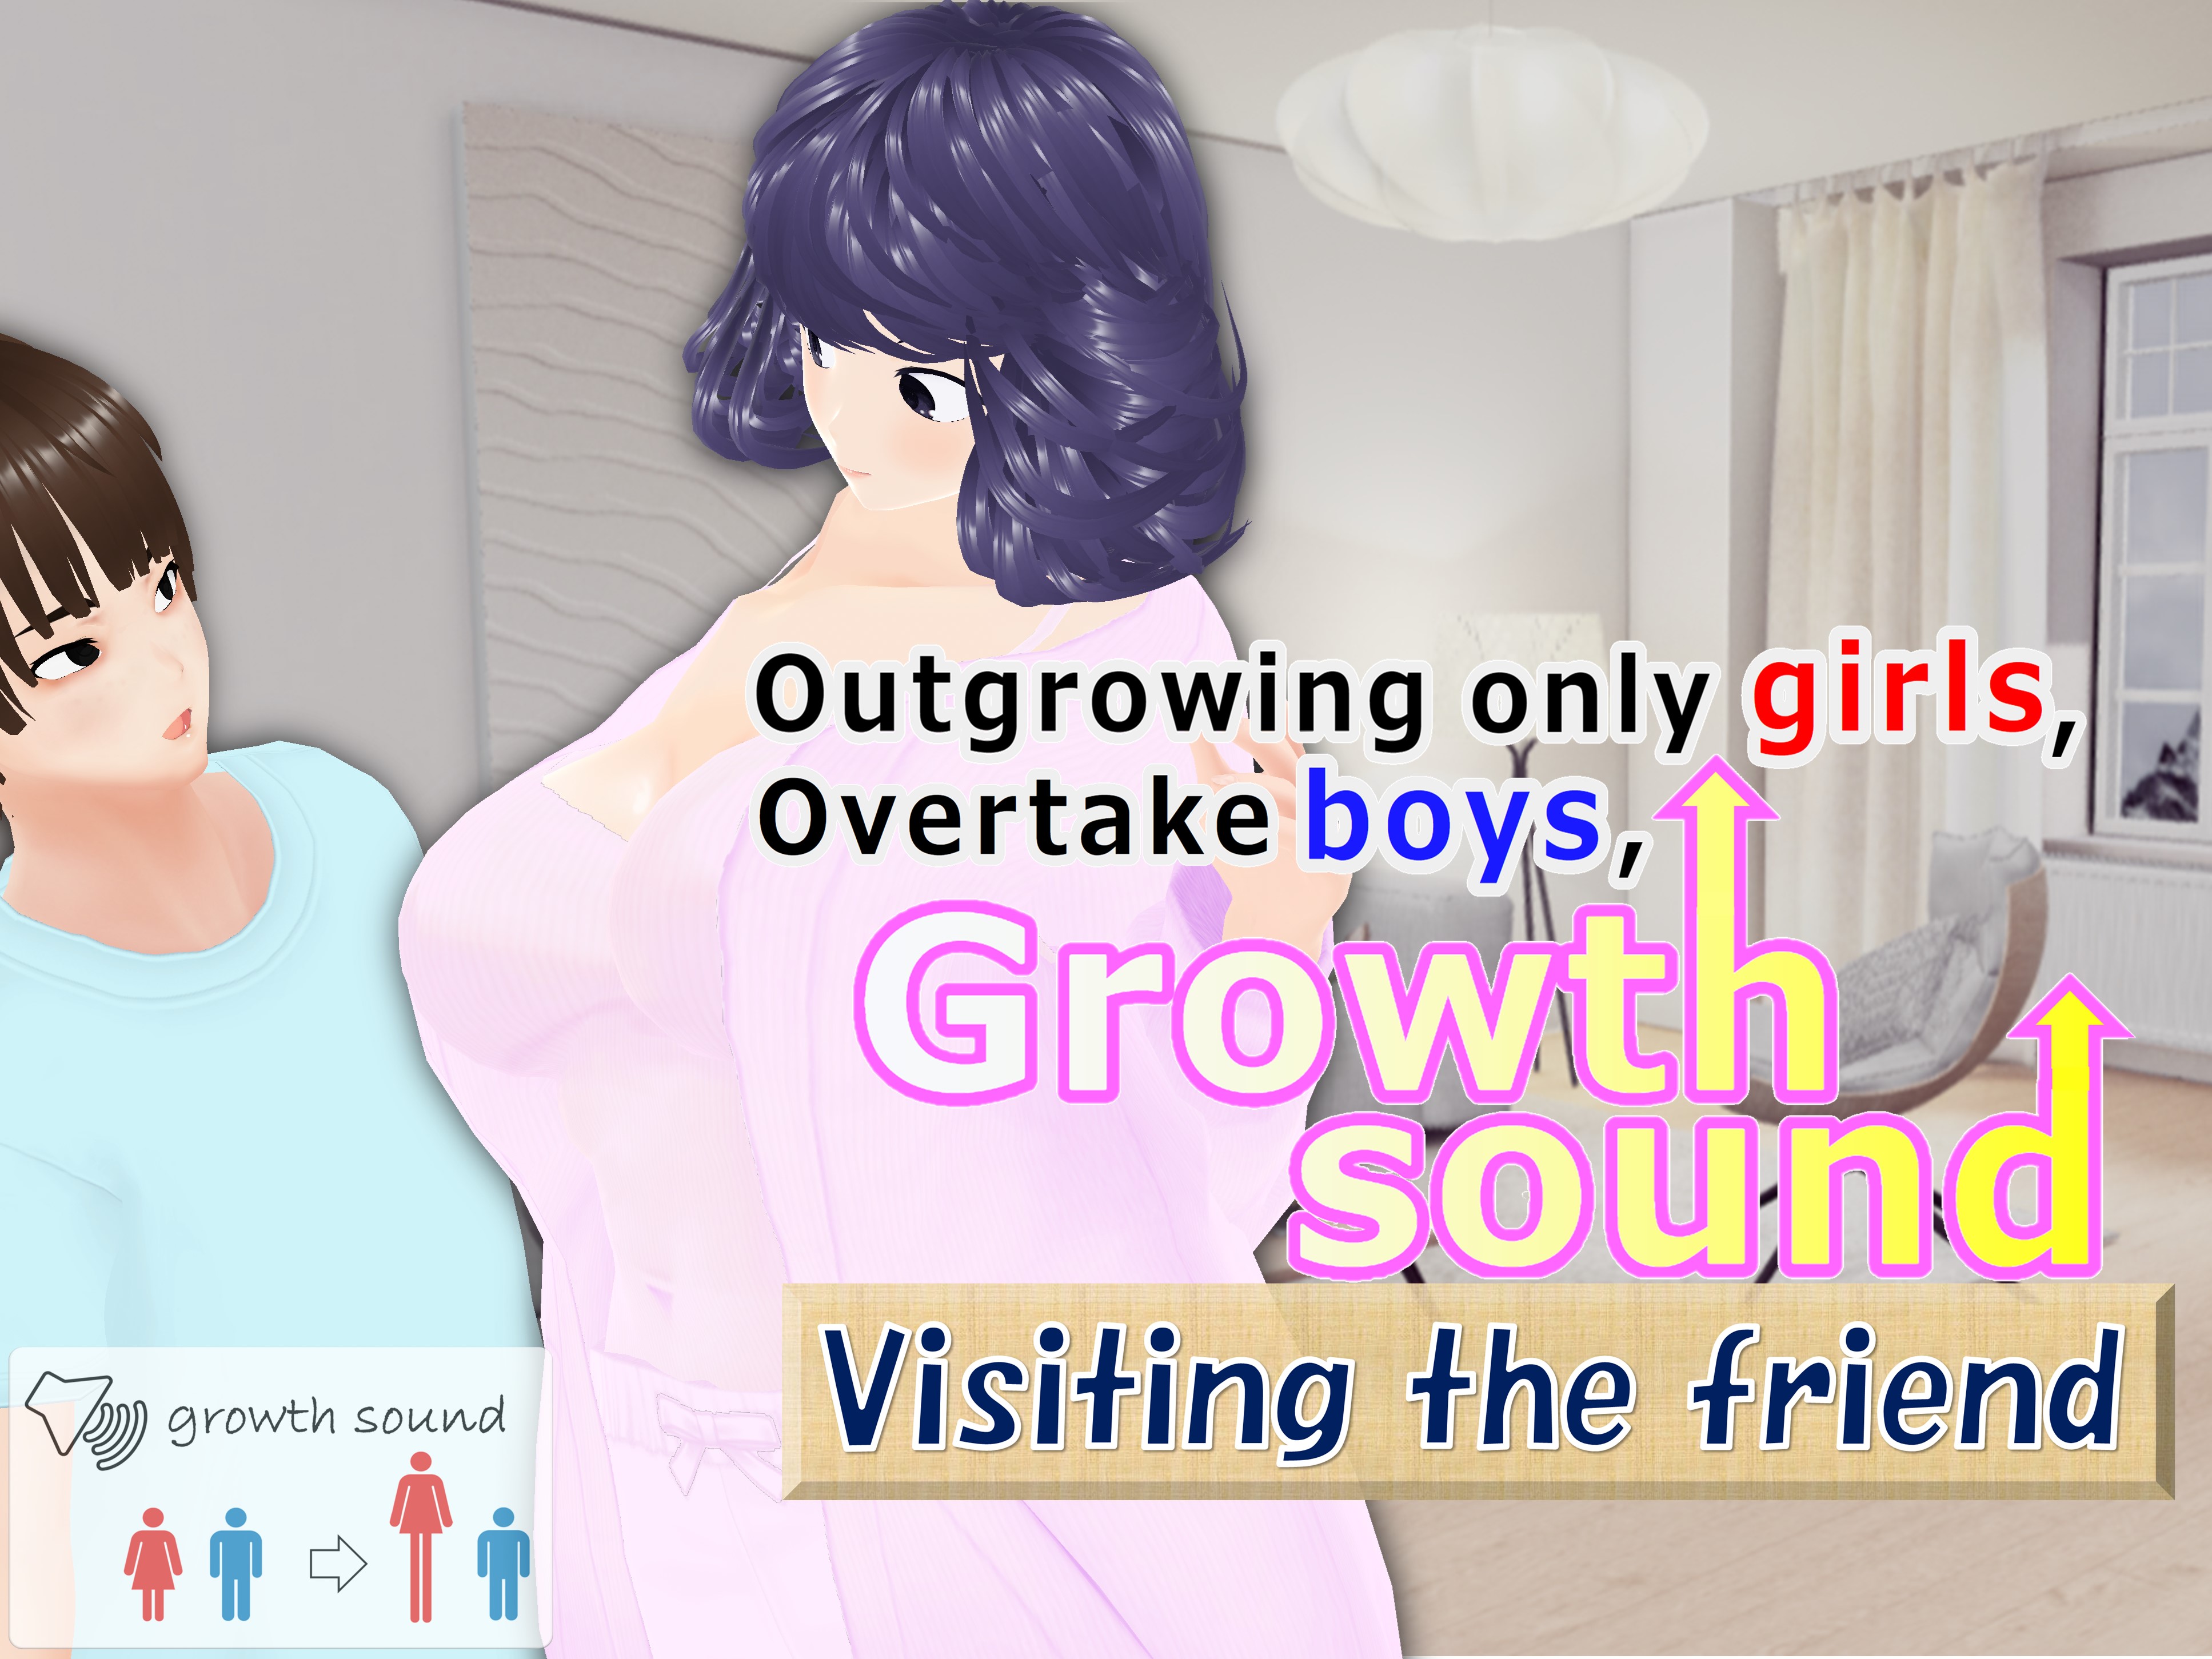 Outgrowing only girls, Overtake boys, Growth sound. Visiting the friend Arc